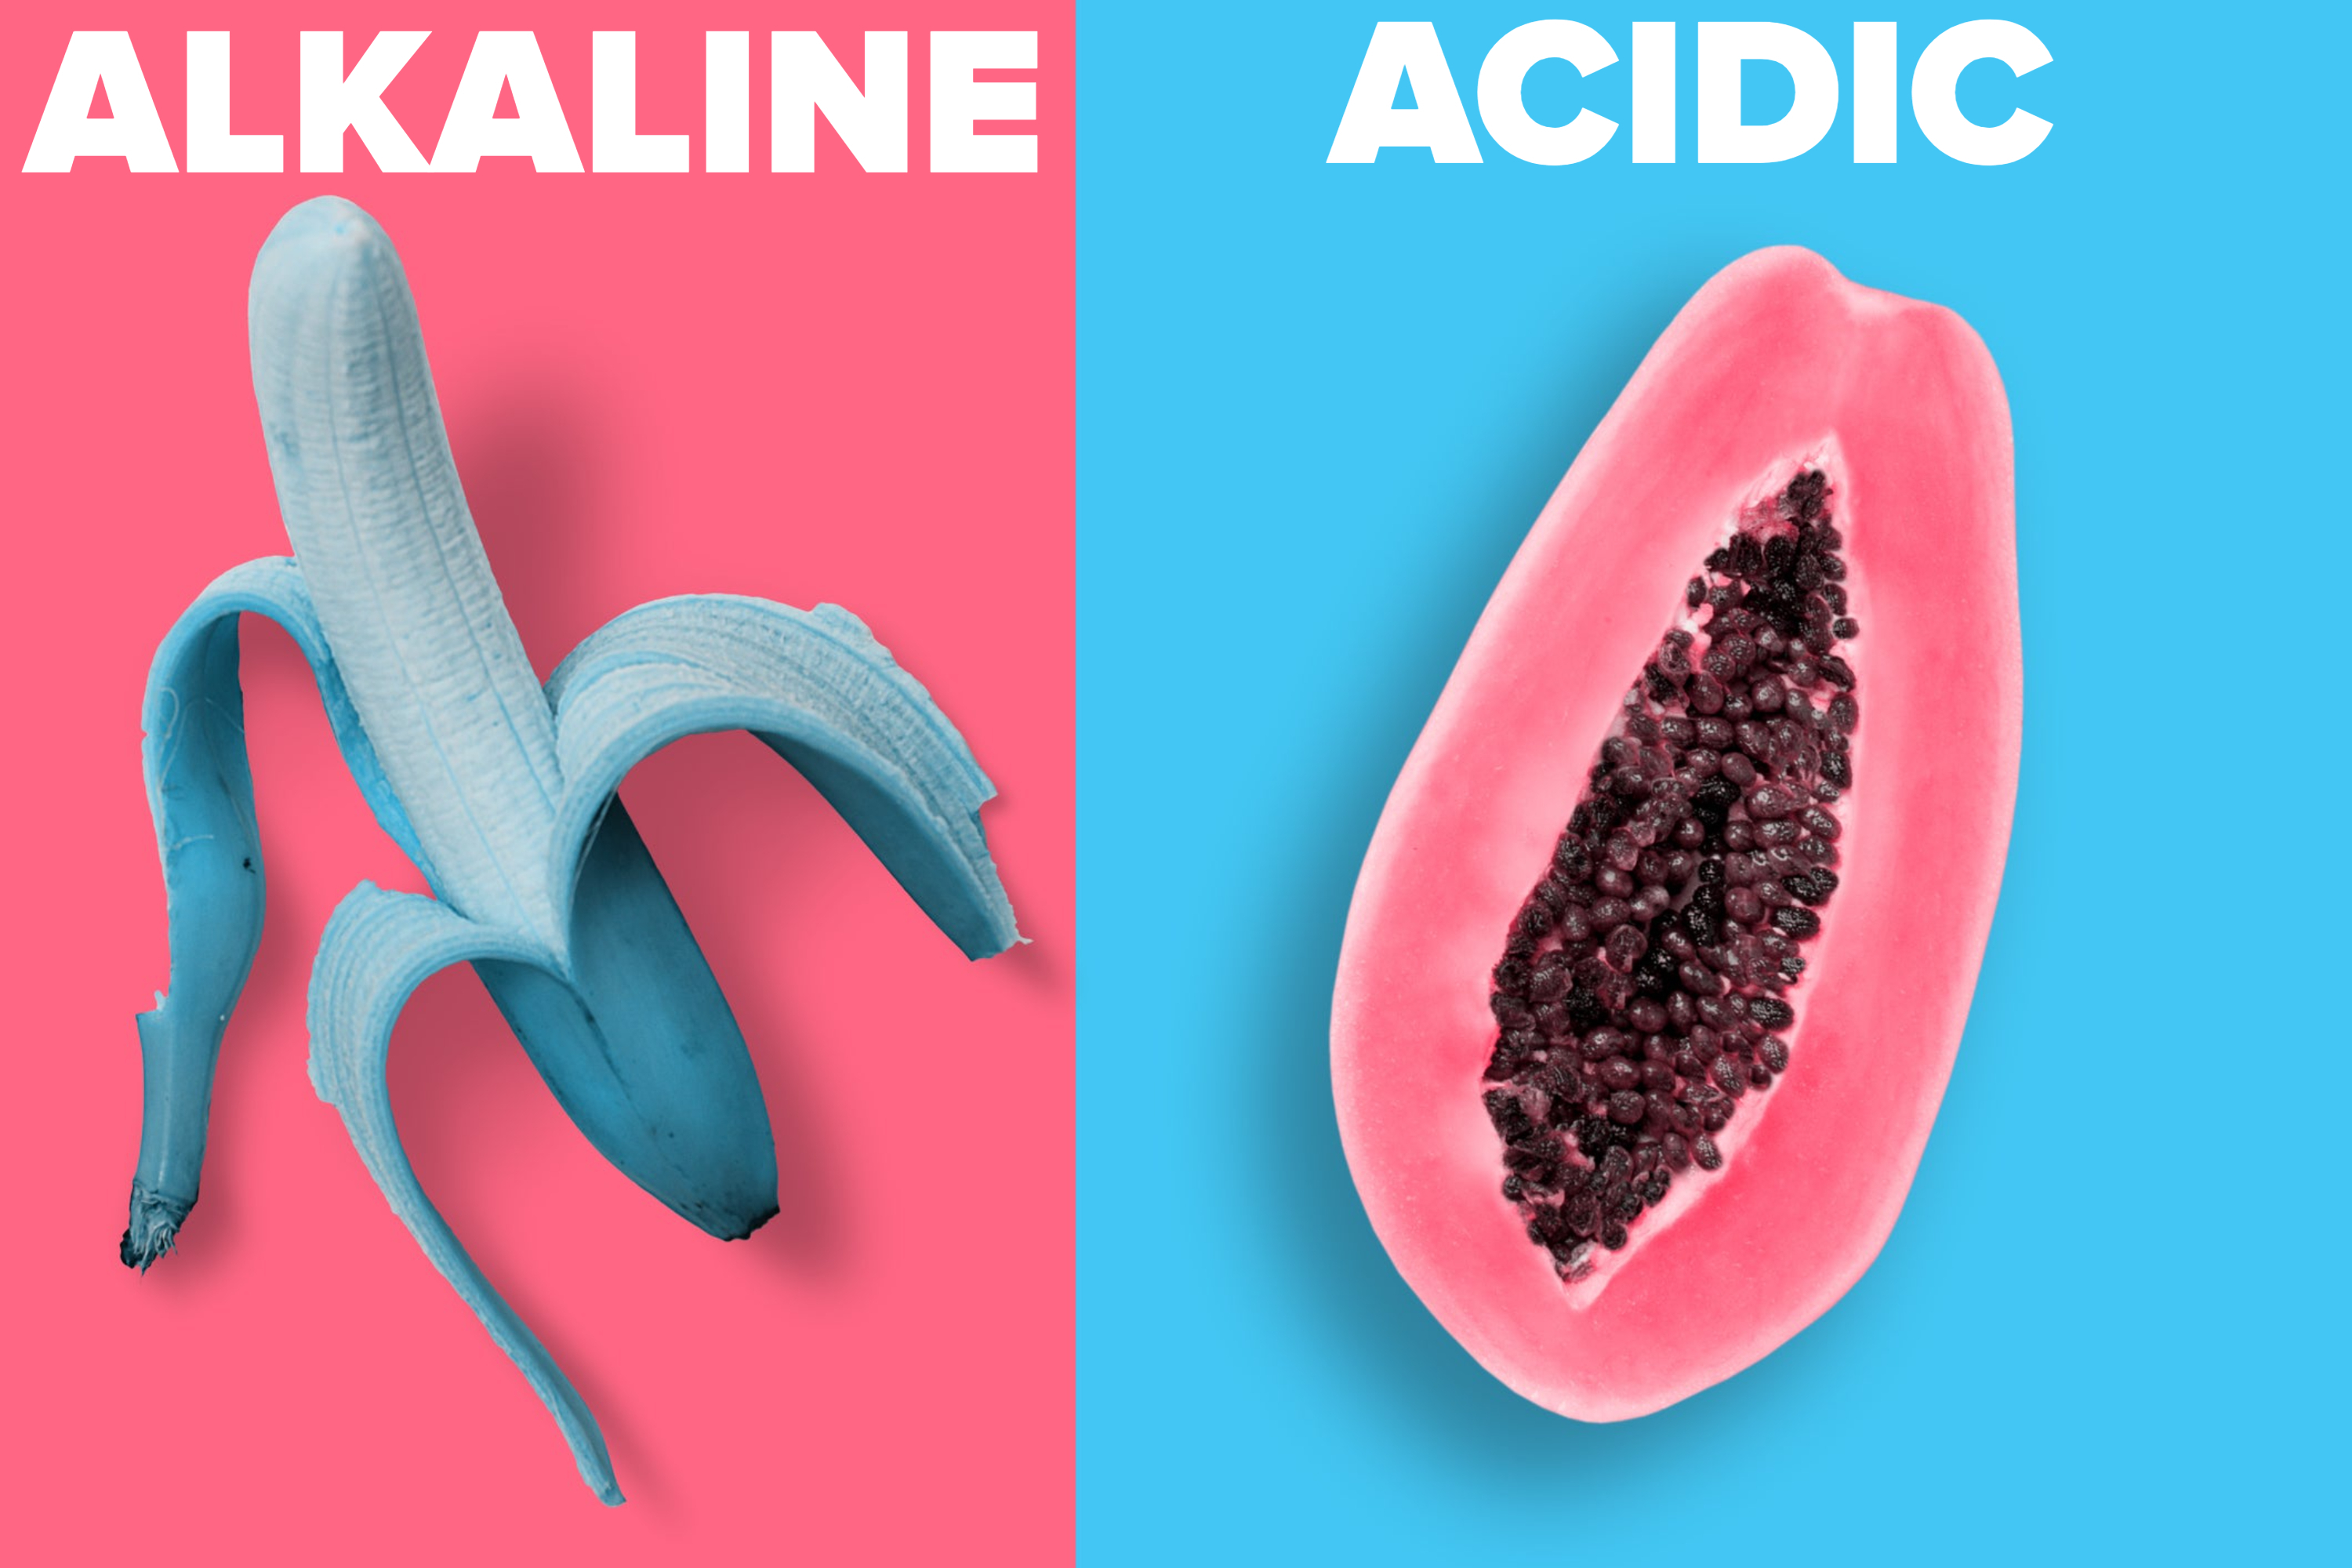 A partially peeled blue banana is on the left and a halved pink papaya with black seeds is on the right, against a split pink and blue background